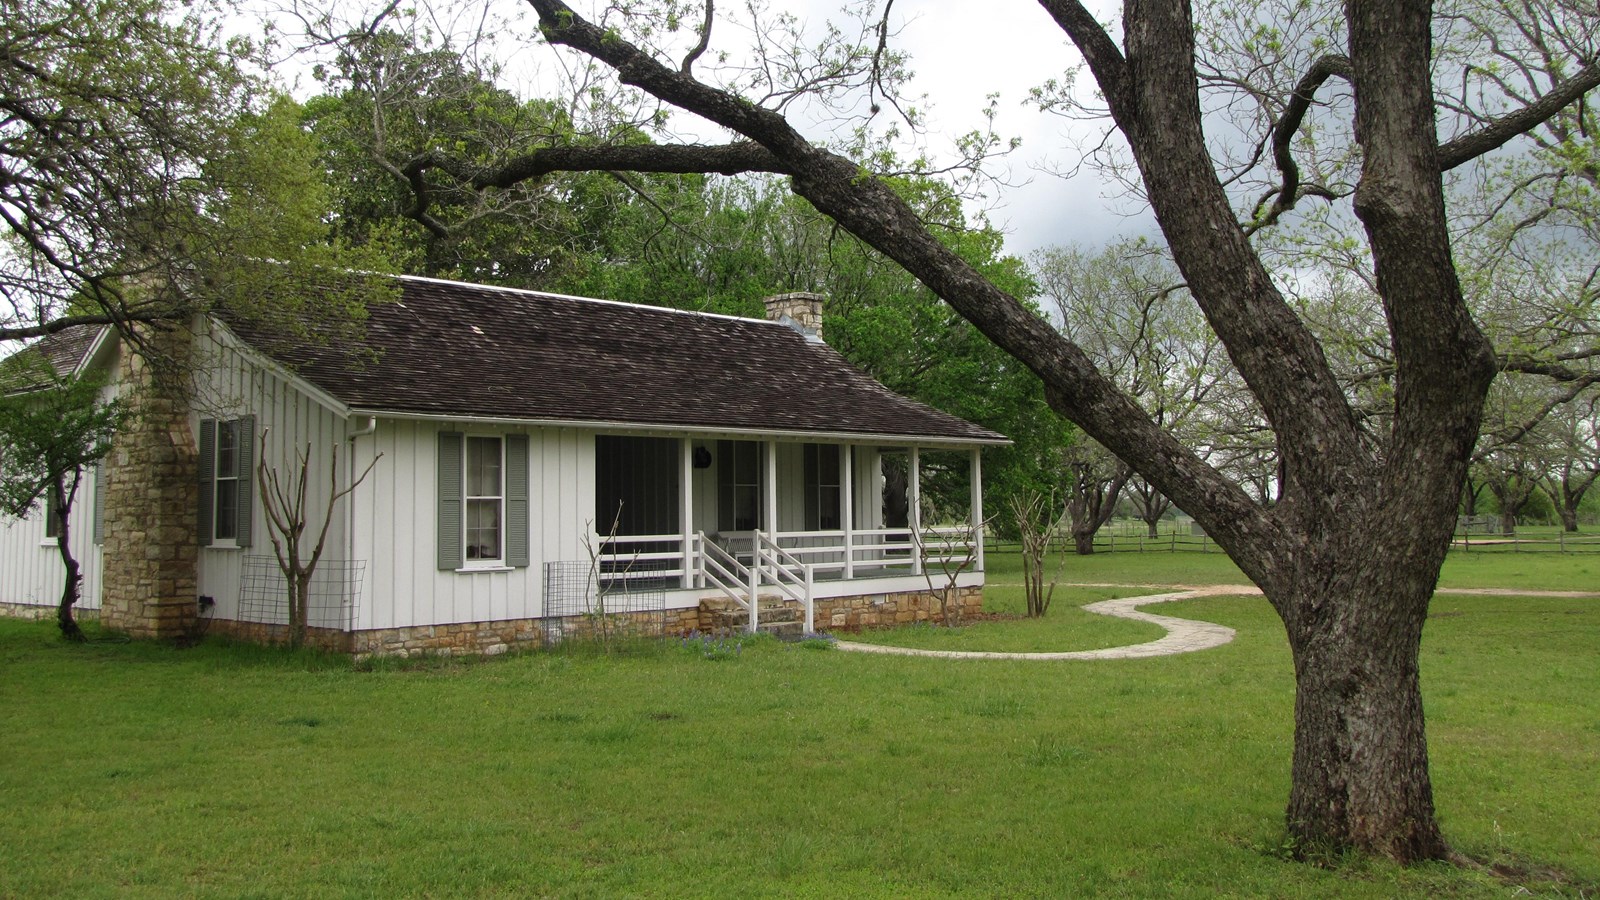 Reconstructed Birthplace (U.S. National Park Service)